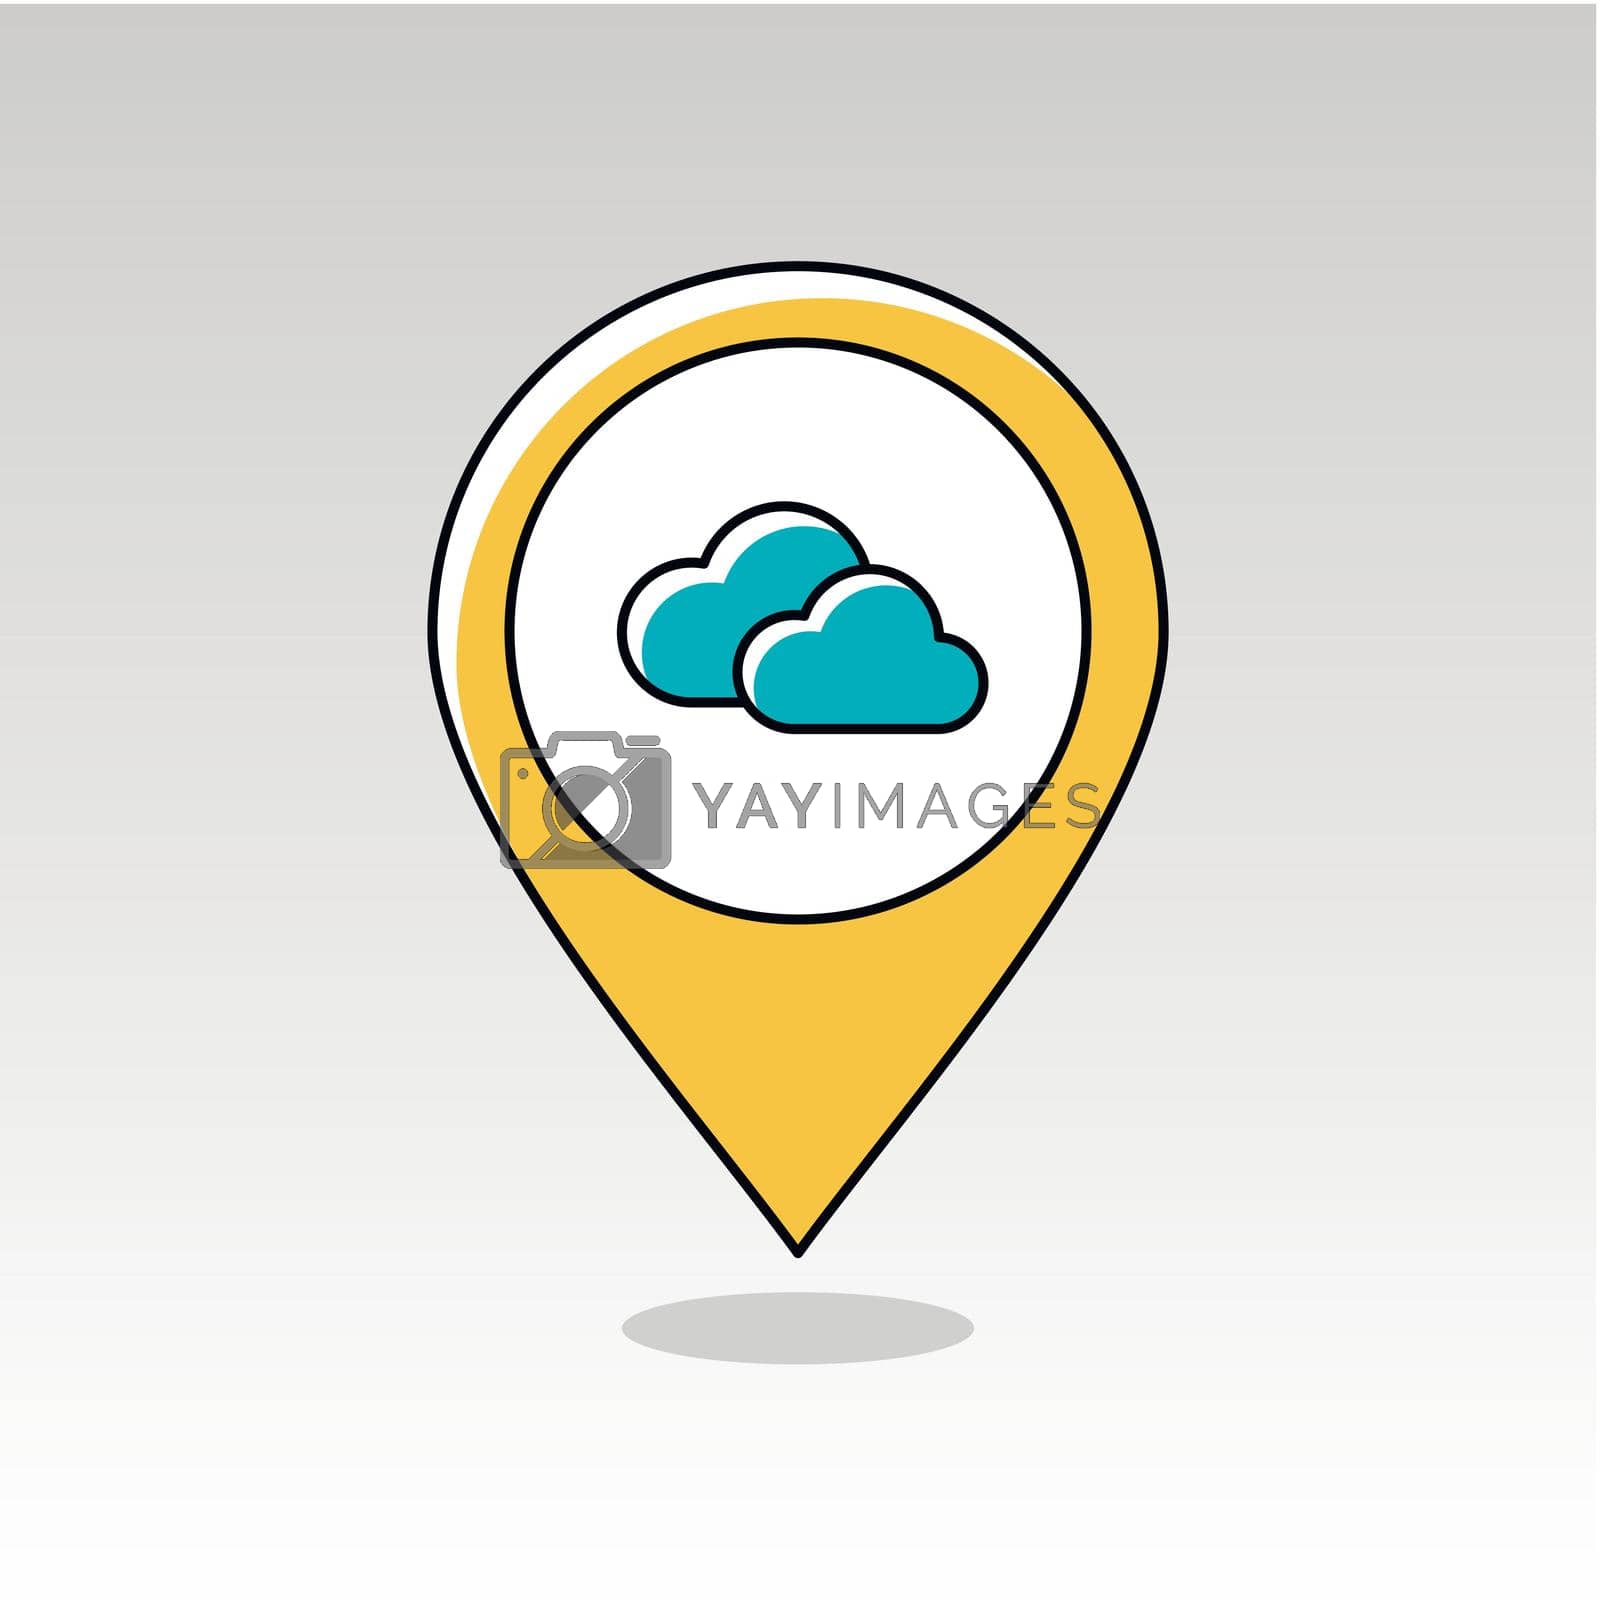 Clouds outline pin map icon. Map pointer. Map markers. Meteorology. Weather. Vector illustration eps 10